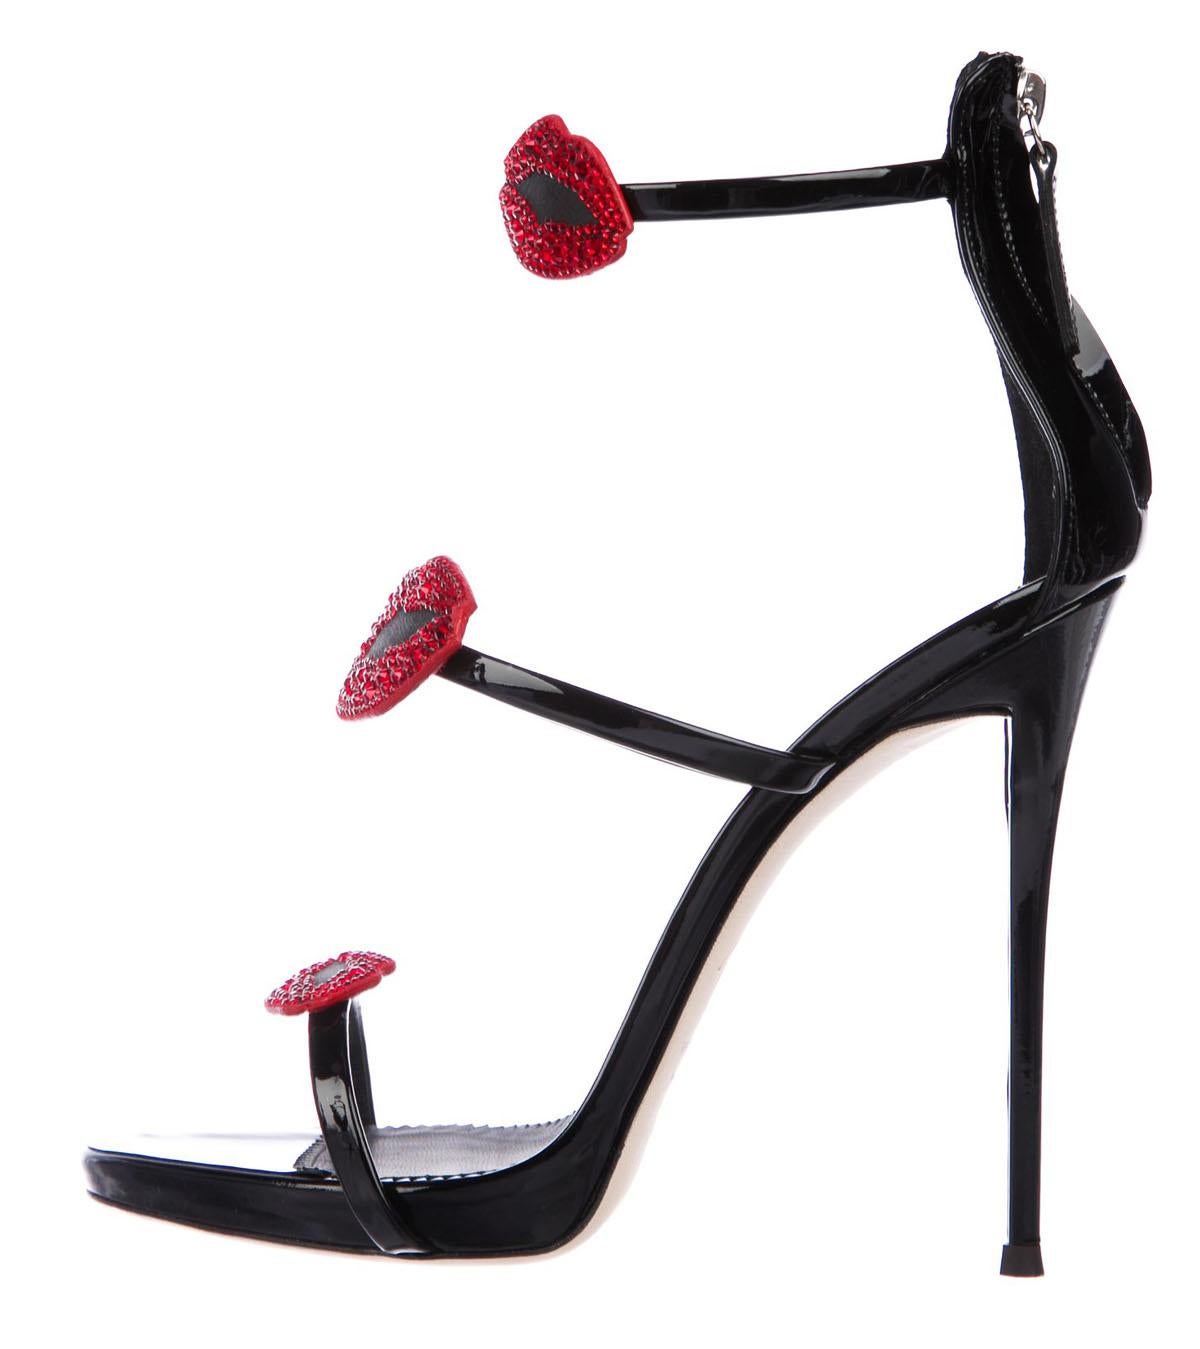 Giuseppe Zanotti *Coline* Patent Leather Sandals with Crystal Lips Appliqués.
Designer size 39 - US 9 ( This brand typically runs a half size small ).
A Big Kiss to You from Giuseppe Zanotti !!!
Giuseppe Zanotti patent leather sandal with suede and